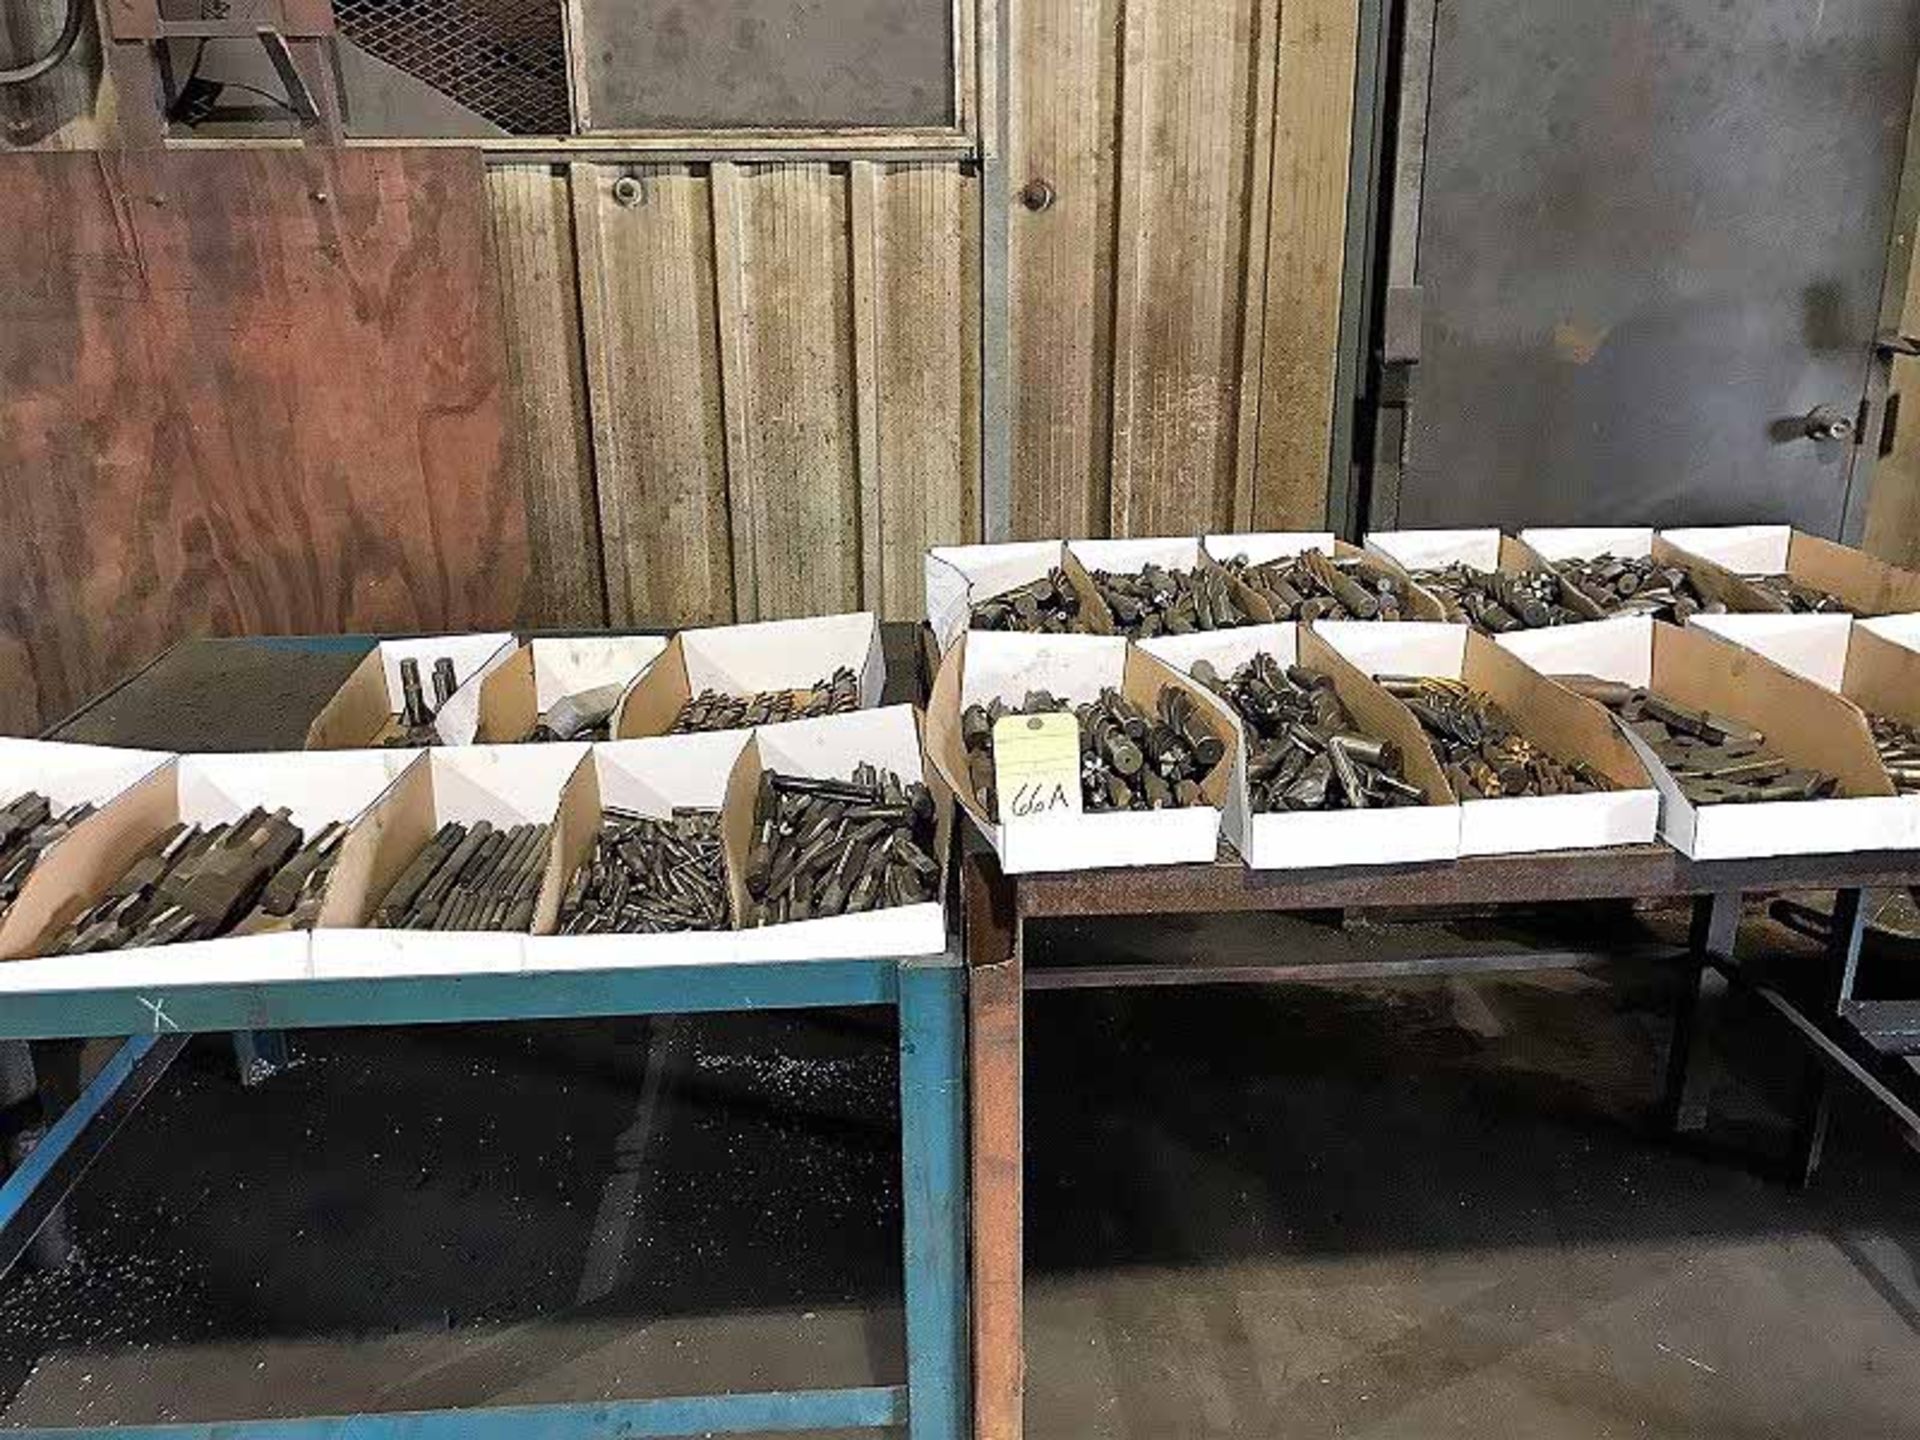 LOT CONSISTING OF: taps, drills, endmills, spade drills, misc. (must be removed by April 13) (